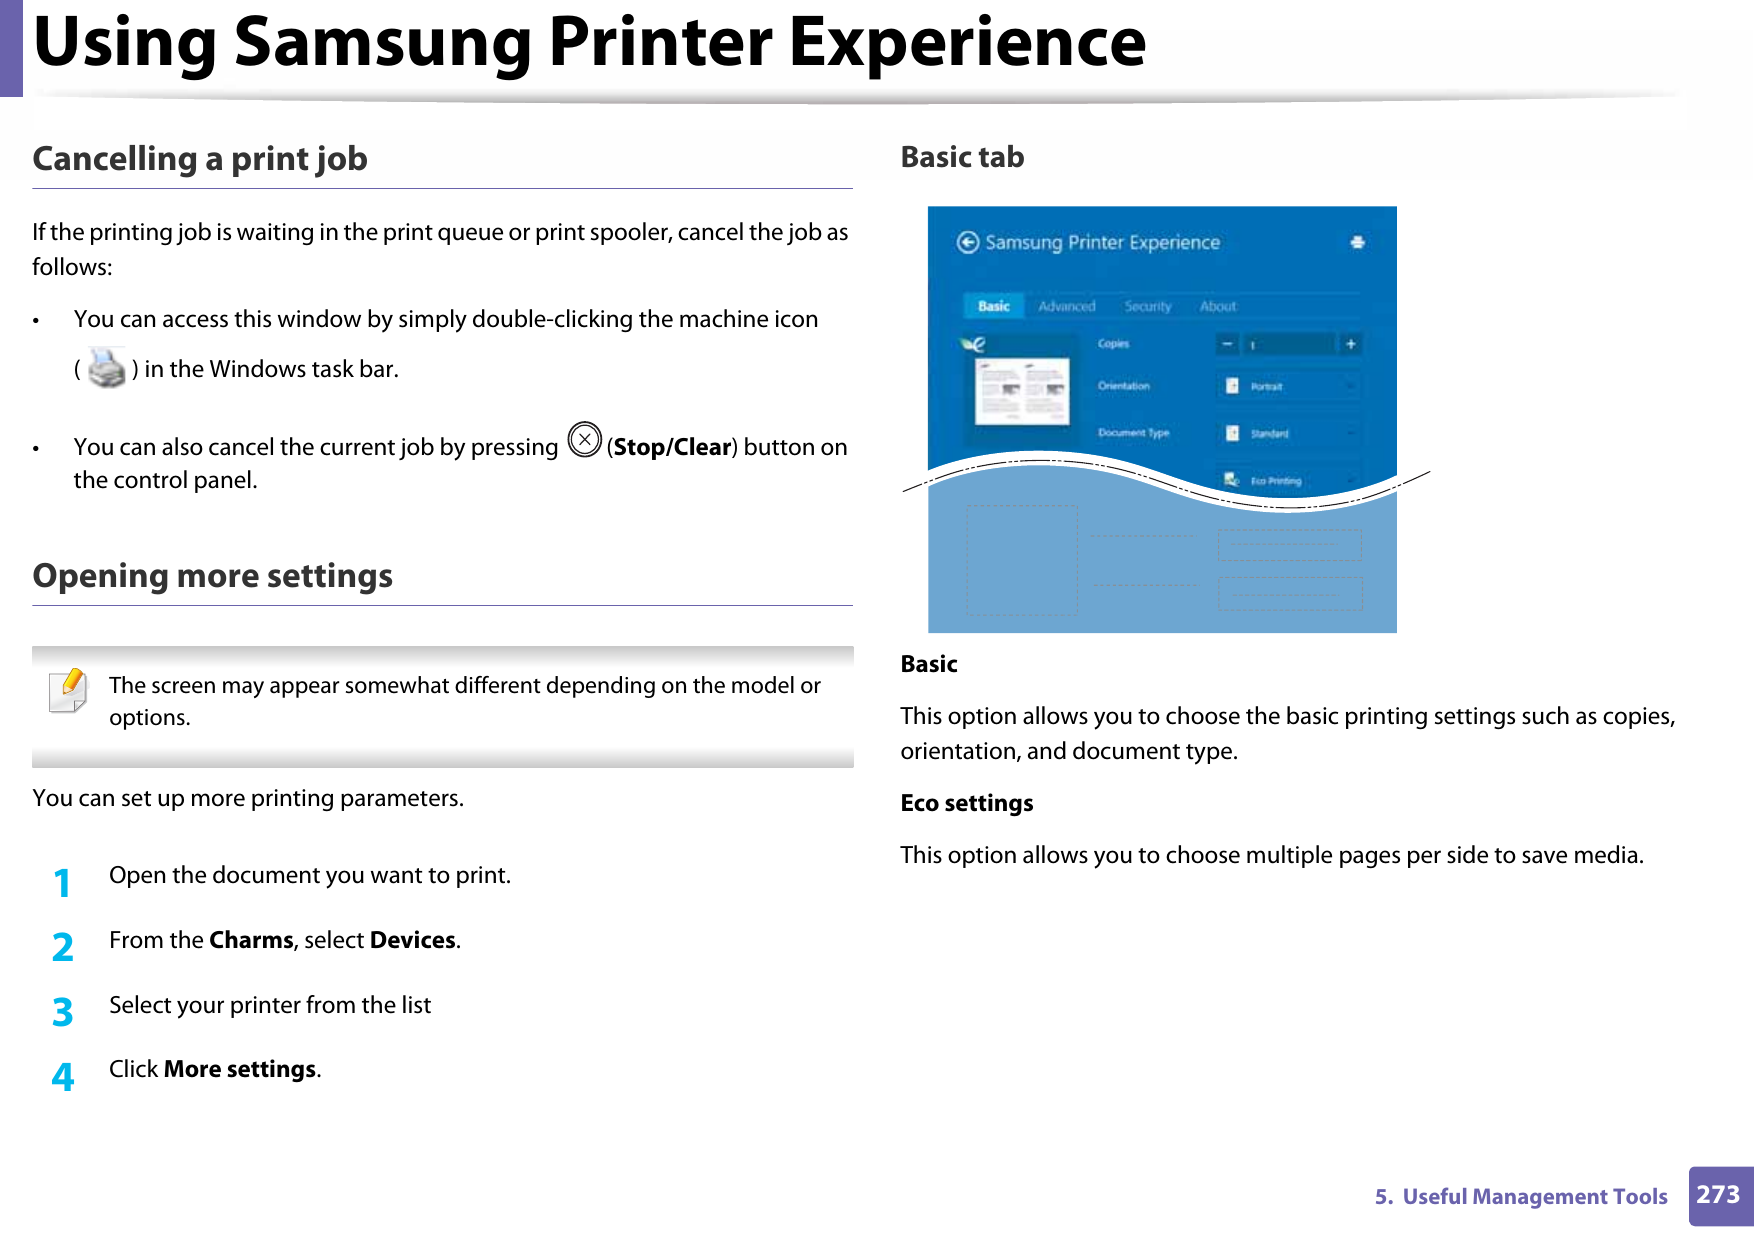 Using Samsung Printer Experience2735.  Useful Management ToolsCancelling a print jobIf the printing job is waiting in the print queue or print spooler, cancel the job as follows:• You can access this window by simply double-clicking the machine icon ( ) in the Windows task bar. • You can also cancel the current job by pressing  (Stop/Clear) button on the control panel.Opening more settings The screen may appear somewhat different depending on the model or options. You can set up more printing parameters.1Open the document you want to print.2  From the Charms, select Devices.3  Select your printer from the list4  Click More settings.Basic tabBasicThis option allows you to choose the basic printing settings such as copies, orientation, and document type.Eco settingsThis option allows you to choose multiple pages per side to save media.